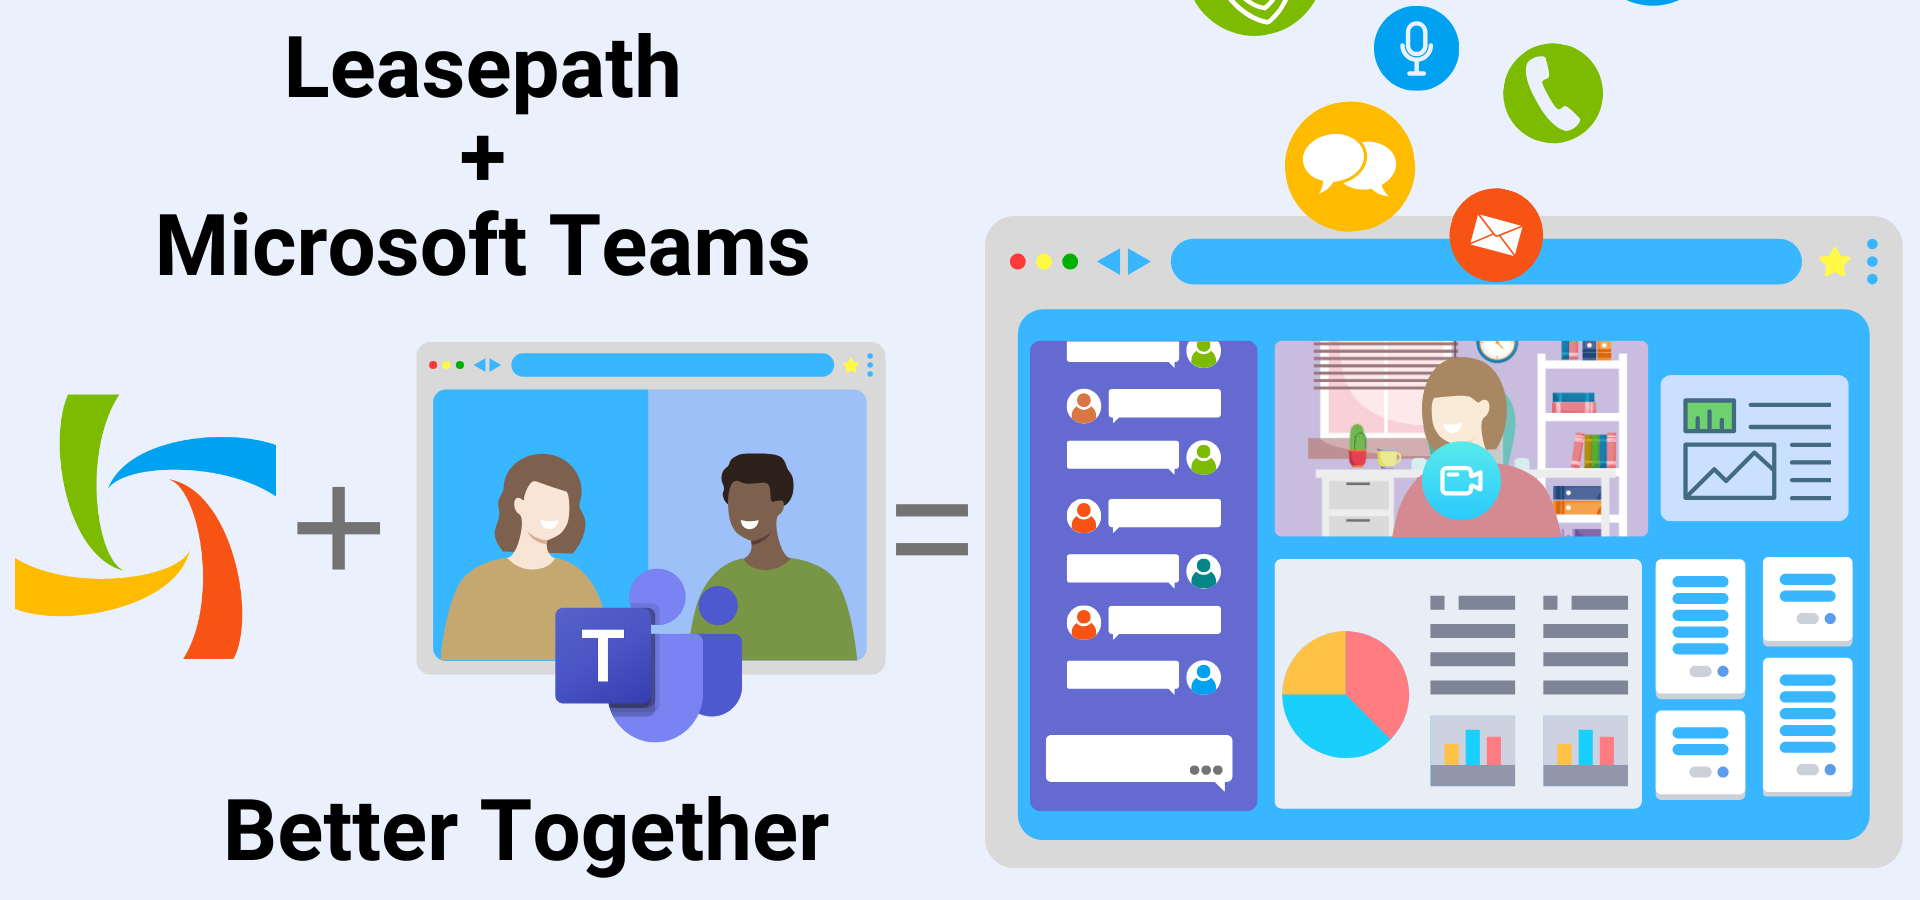 Leasepath and Microsoft Teams make equipment financing better together.